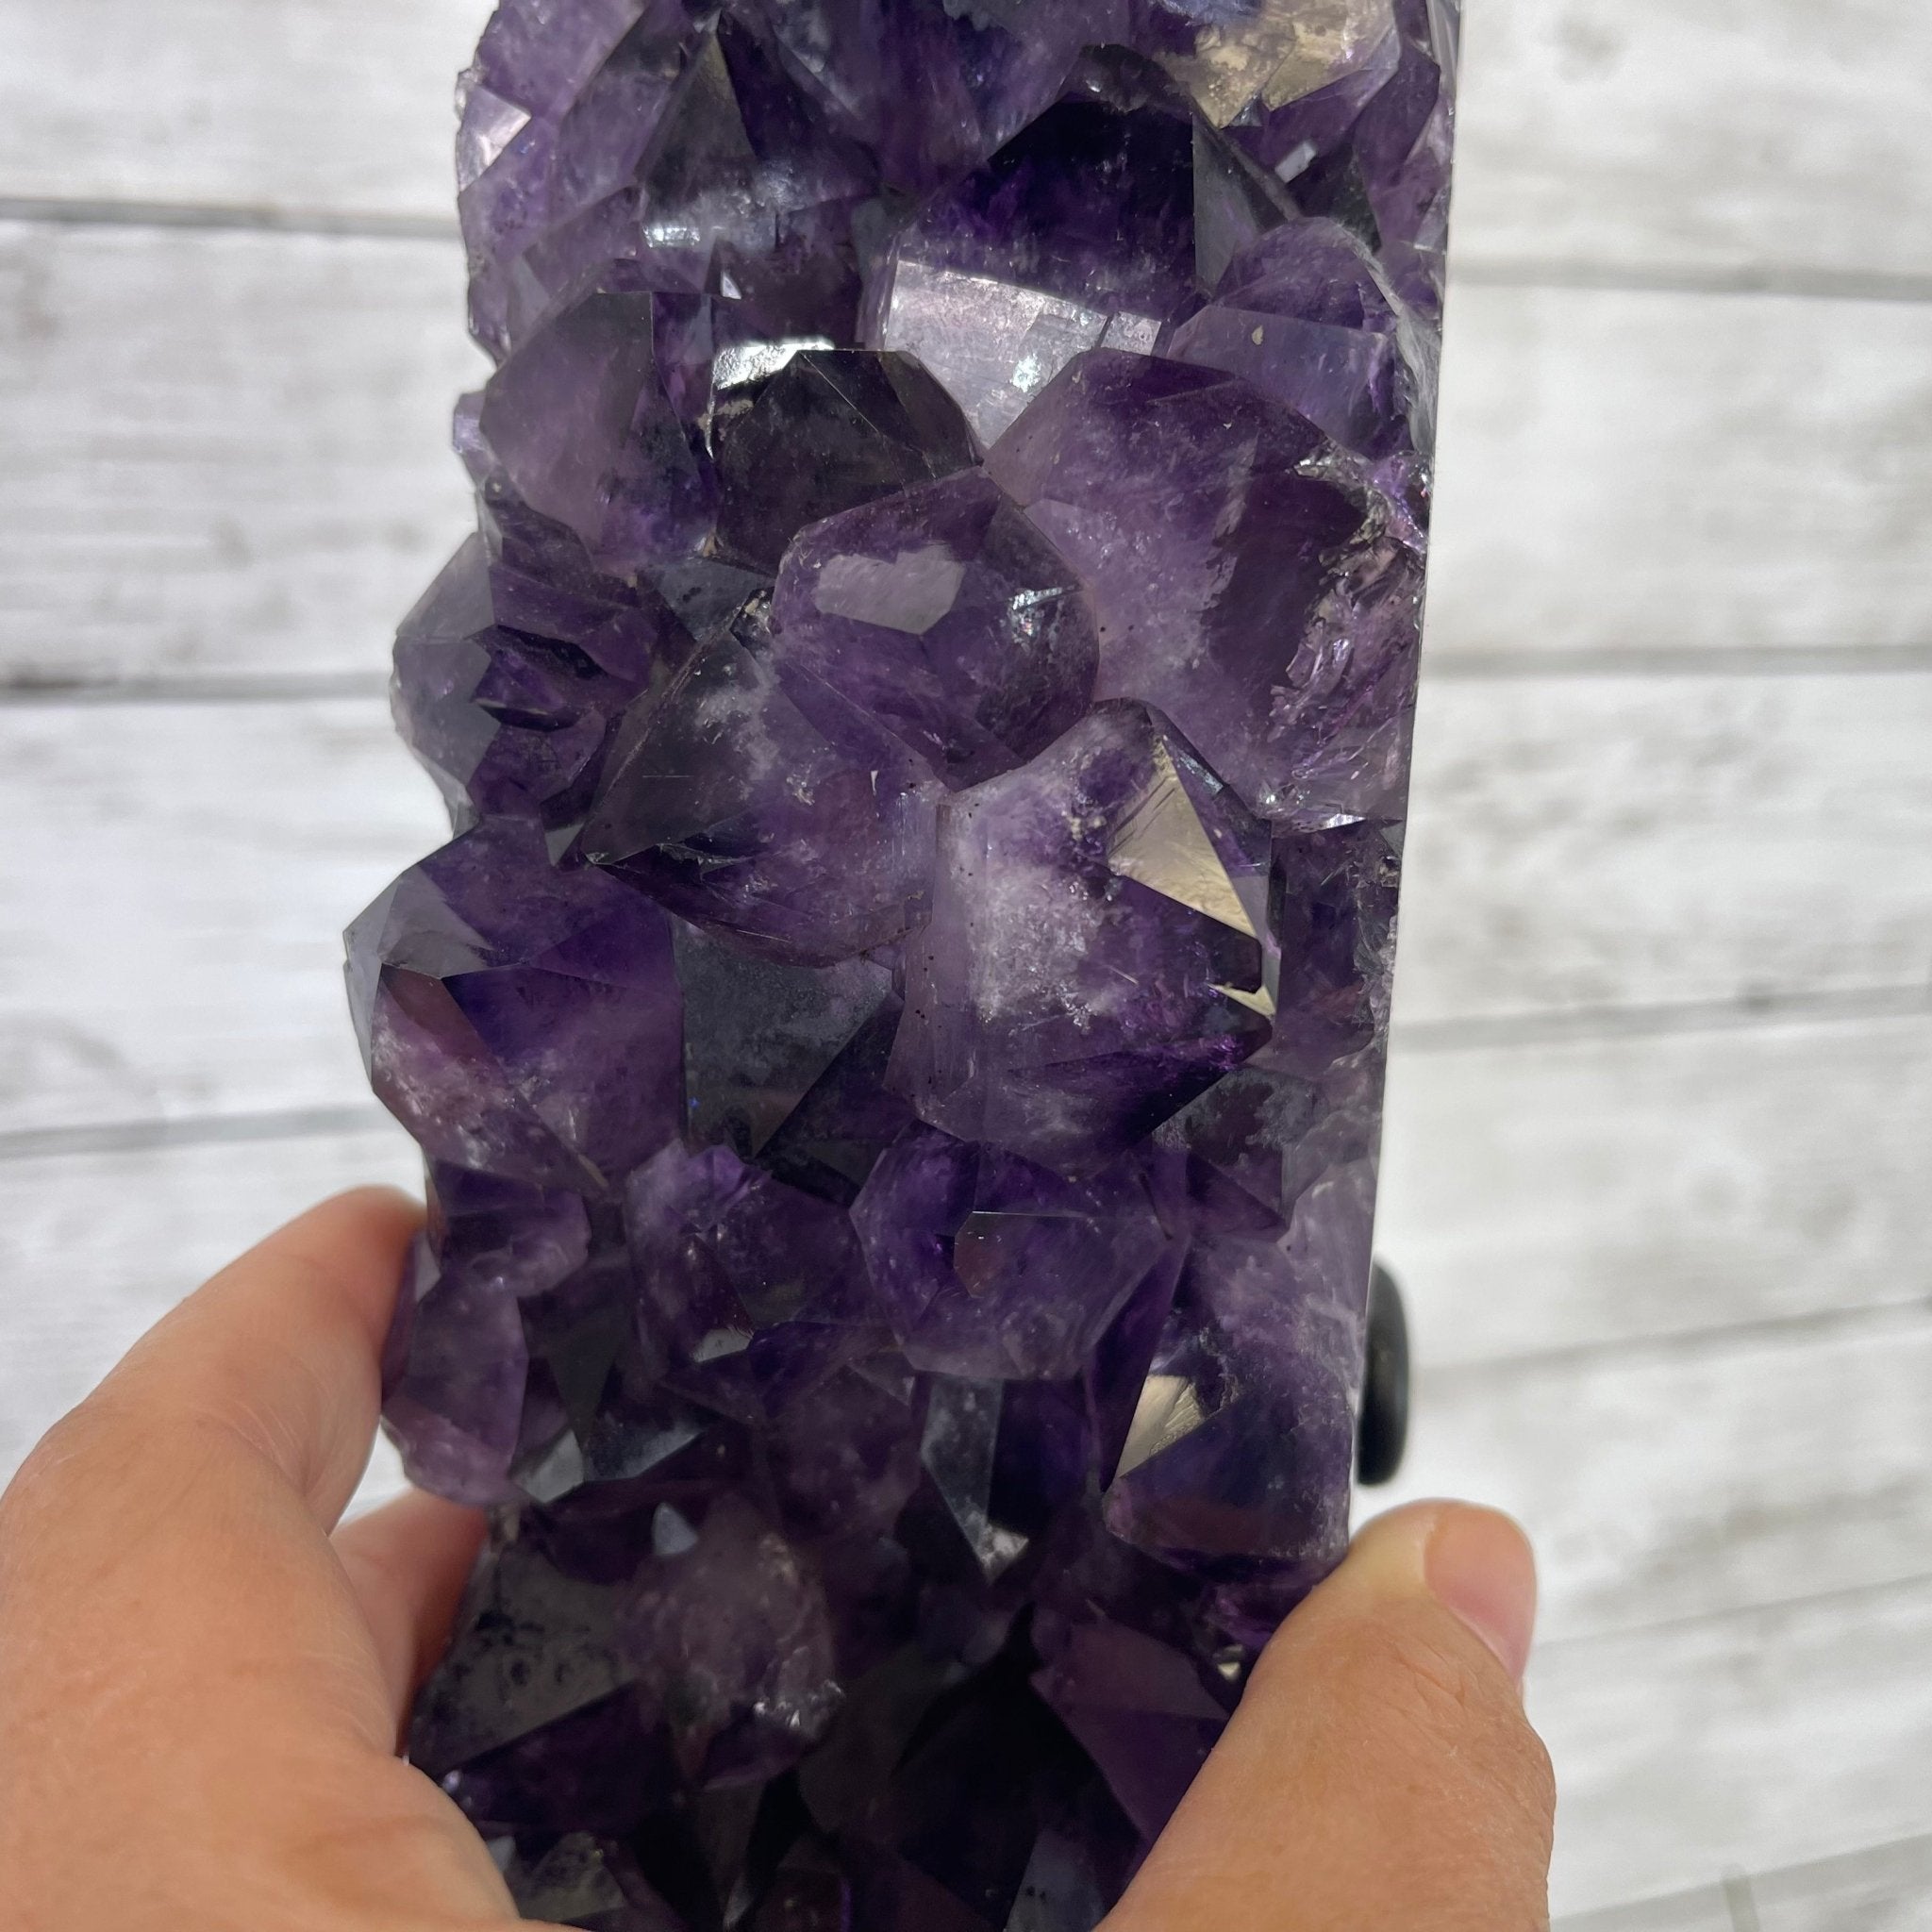 Super Quality Brazilian Amethyst Crystal Portal on a Tall Rotating Stand, 83.8 lbs & 70.7" tall Model #5604-0095 by Brazil Gems - Brazil GemsBrazil GemsSuper Quality Brazilian Amethyst Crystal Portal on a Tall Rotating Stand, 83.8 lbs & 70.7" tall Model #5604-0095 by Brazil GemsPortals on Rotating Bases5604-0095